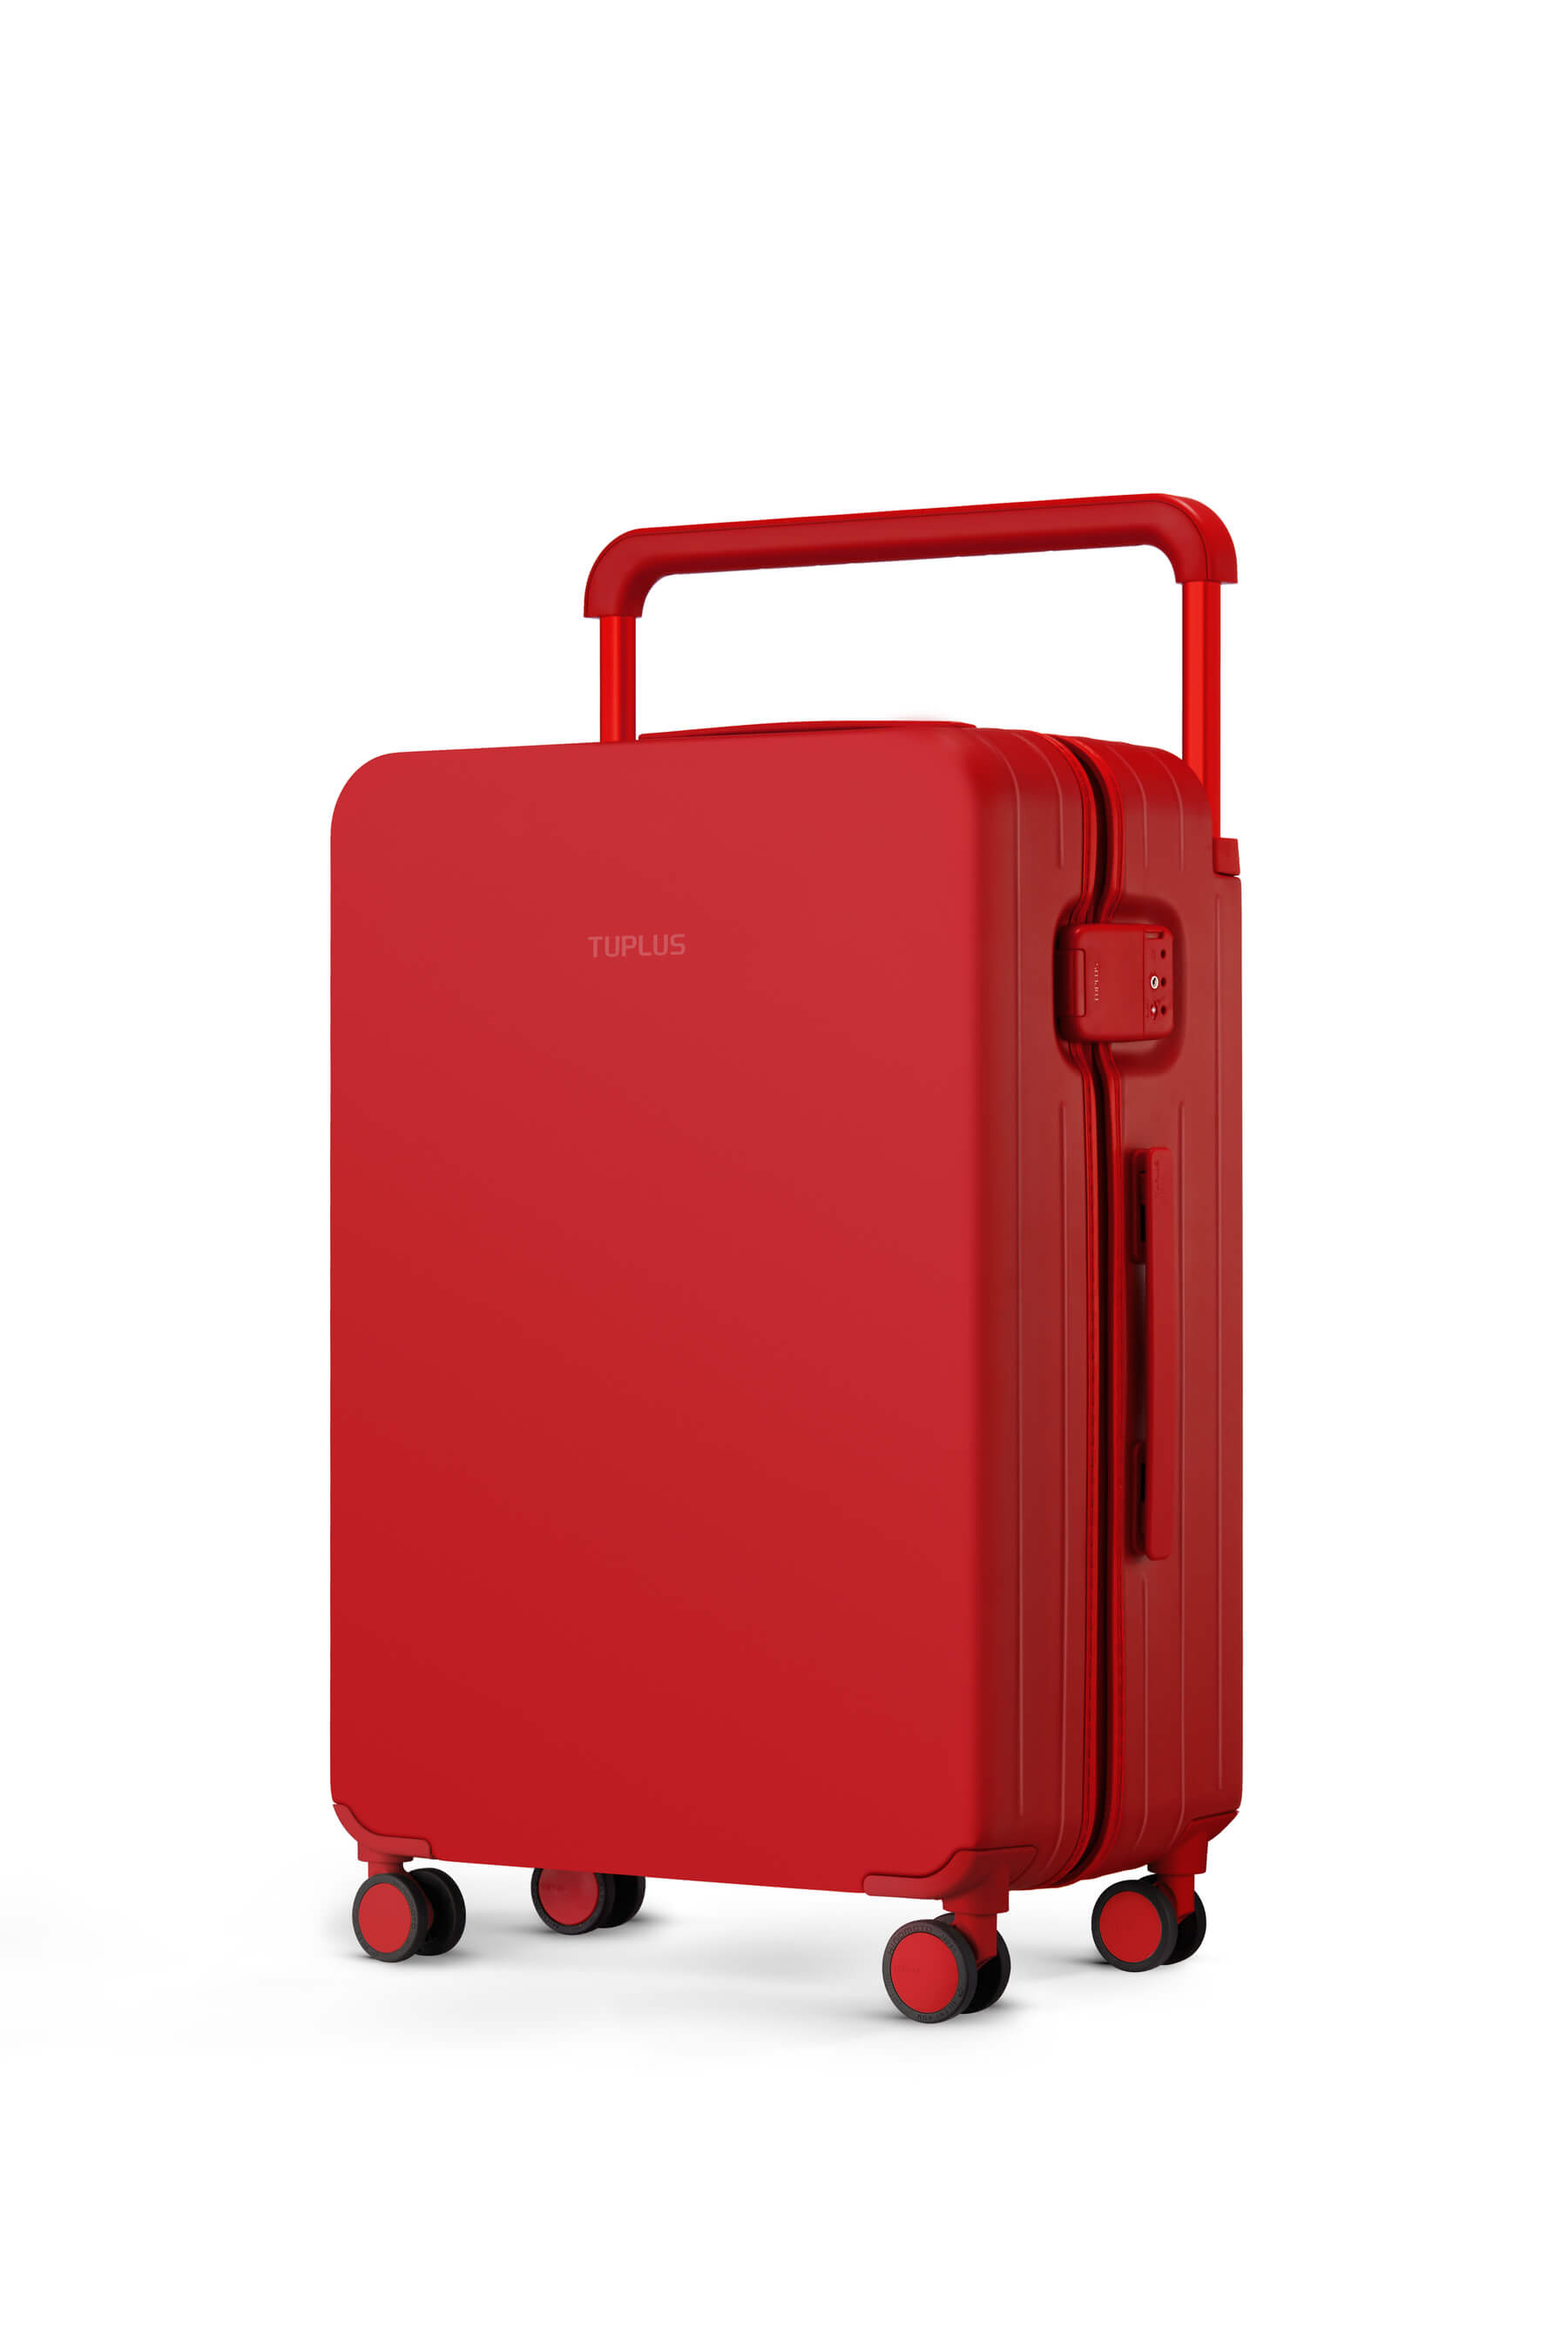 tula-impression-red-carry-on-luggage.jpg